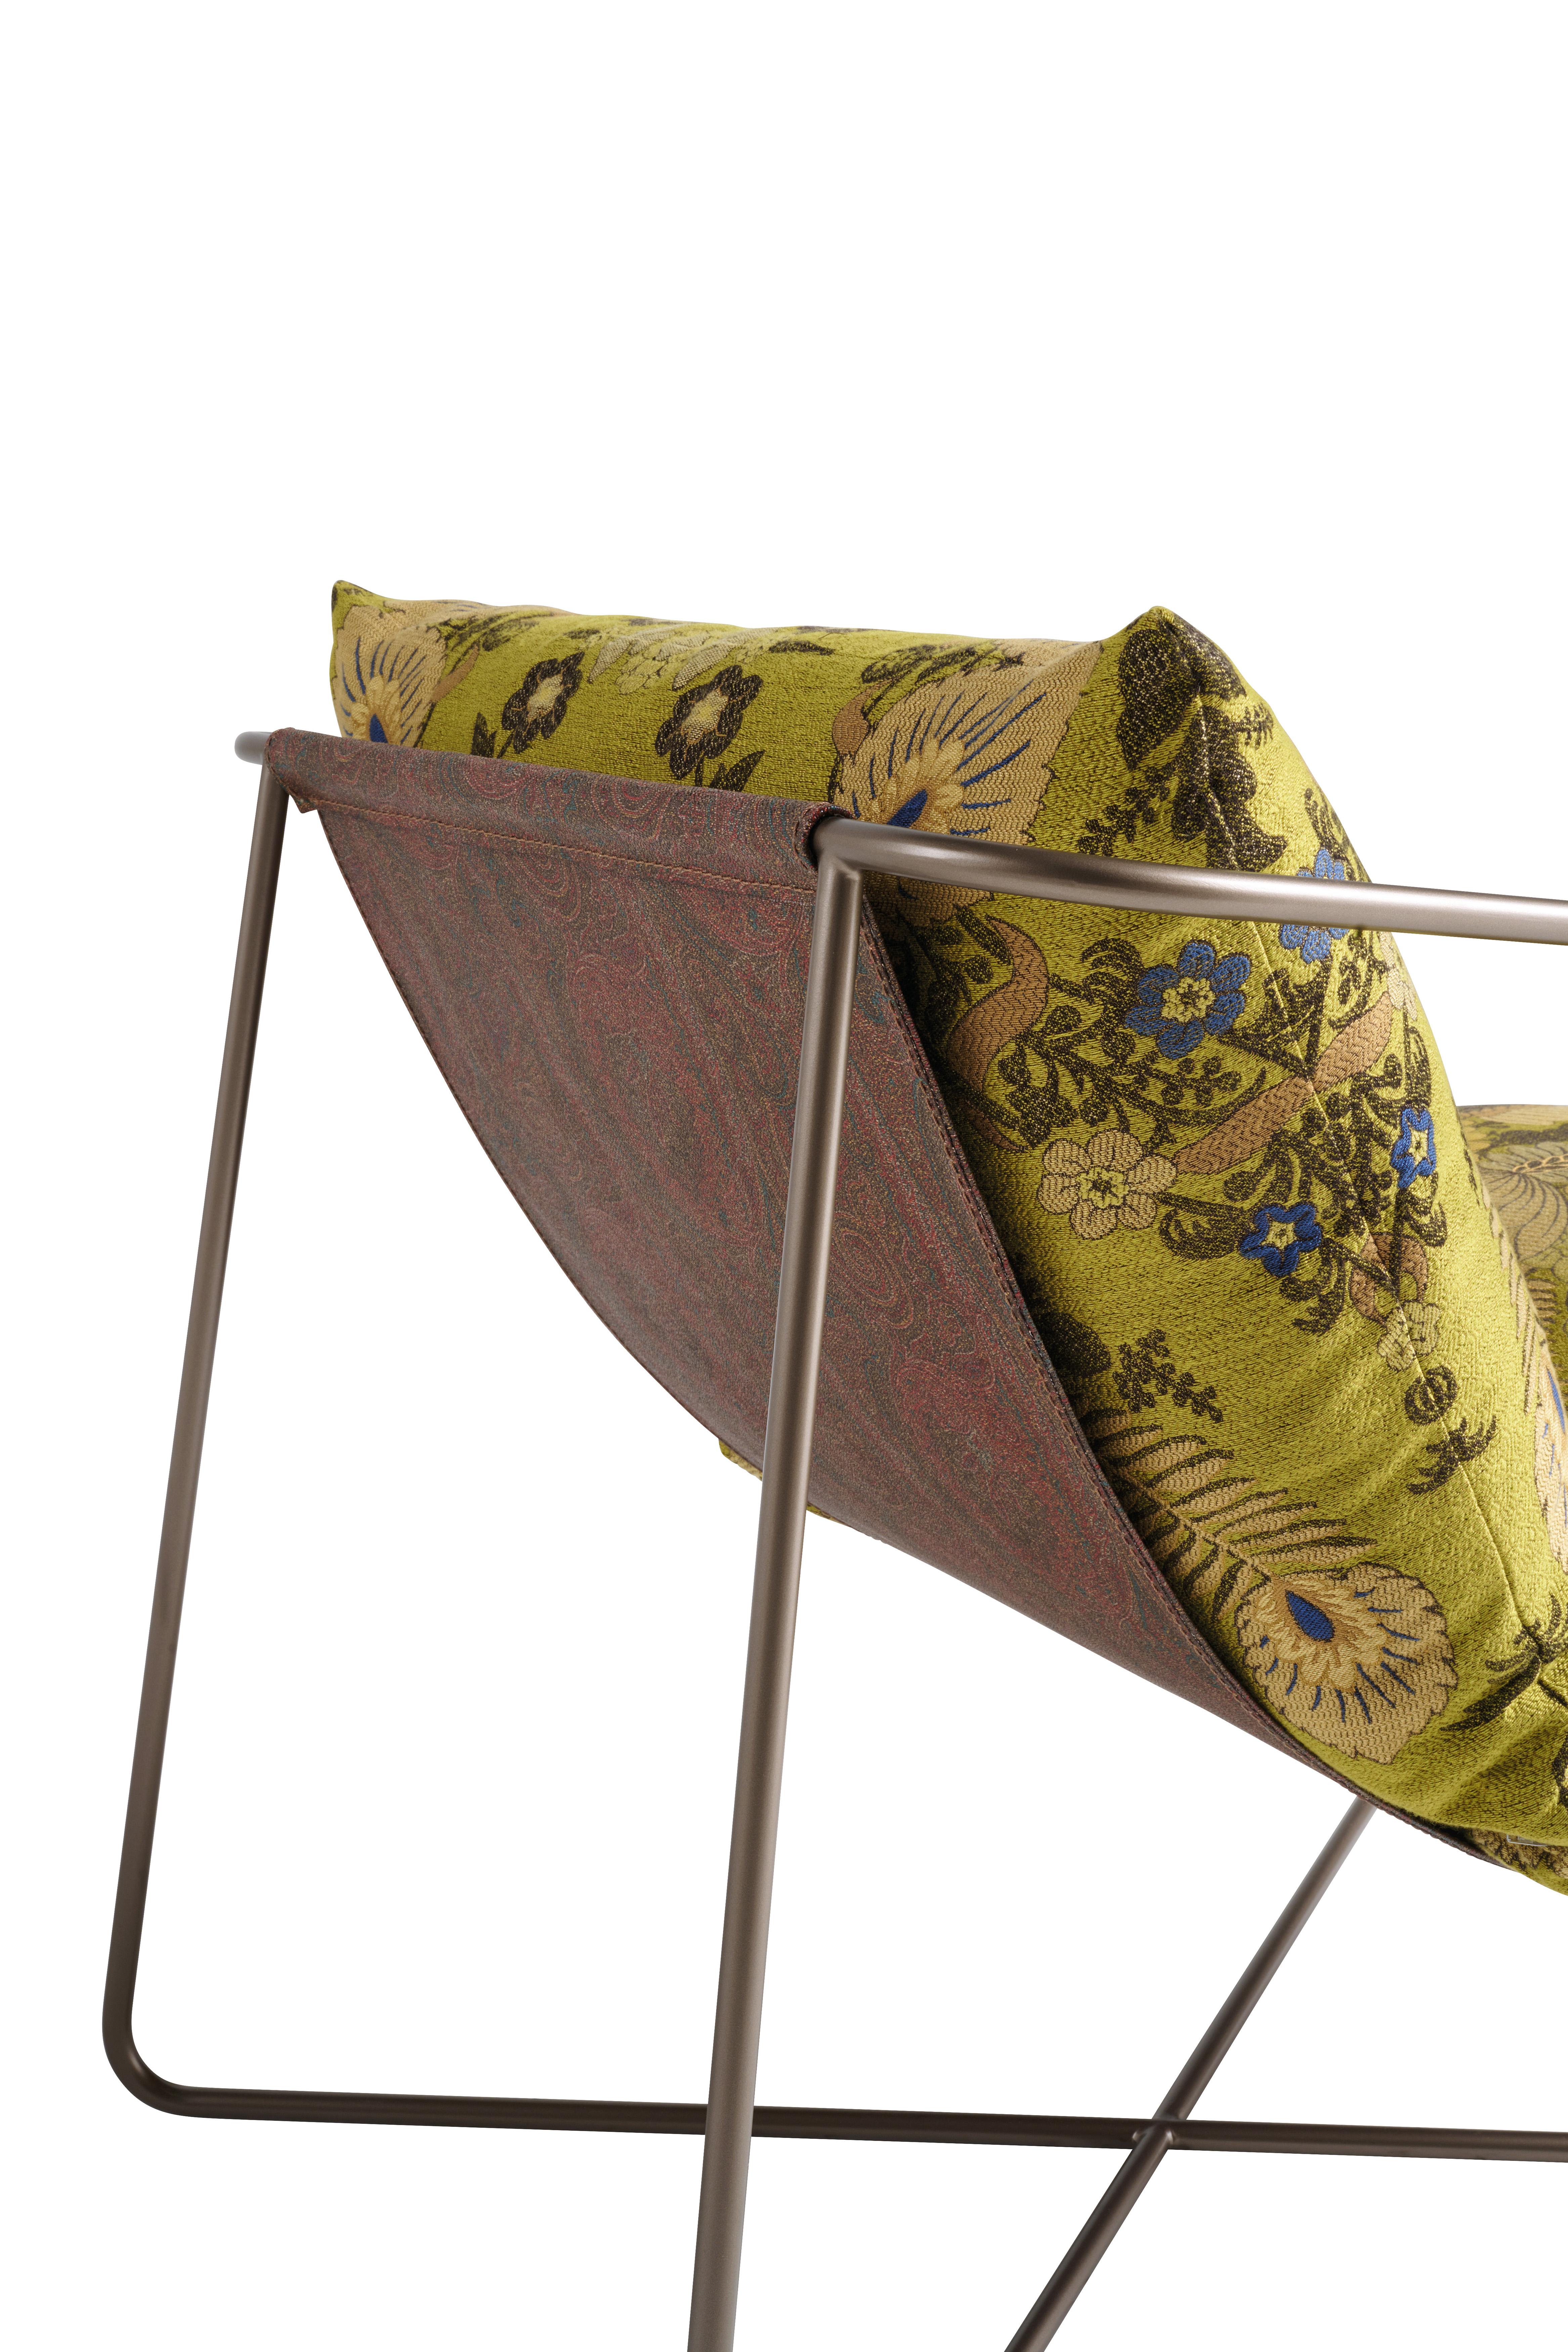 Contemporary 21st Century Levity Armchair in Green Jacquard Fabric by Etro Home Interiors For Sale